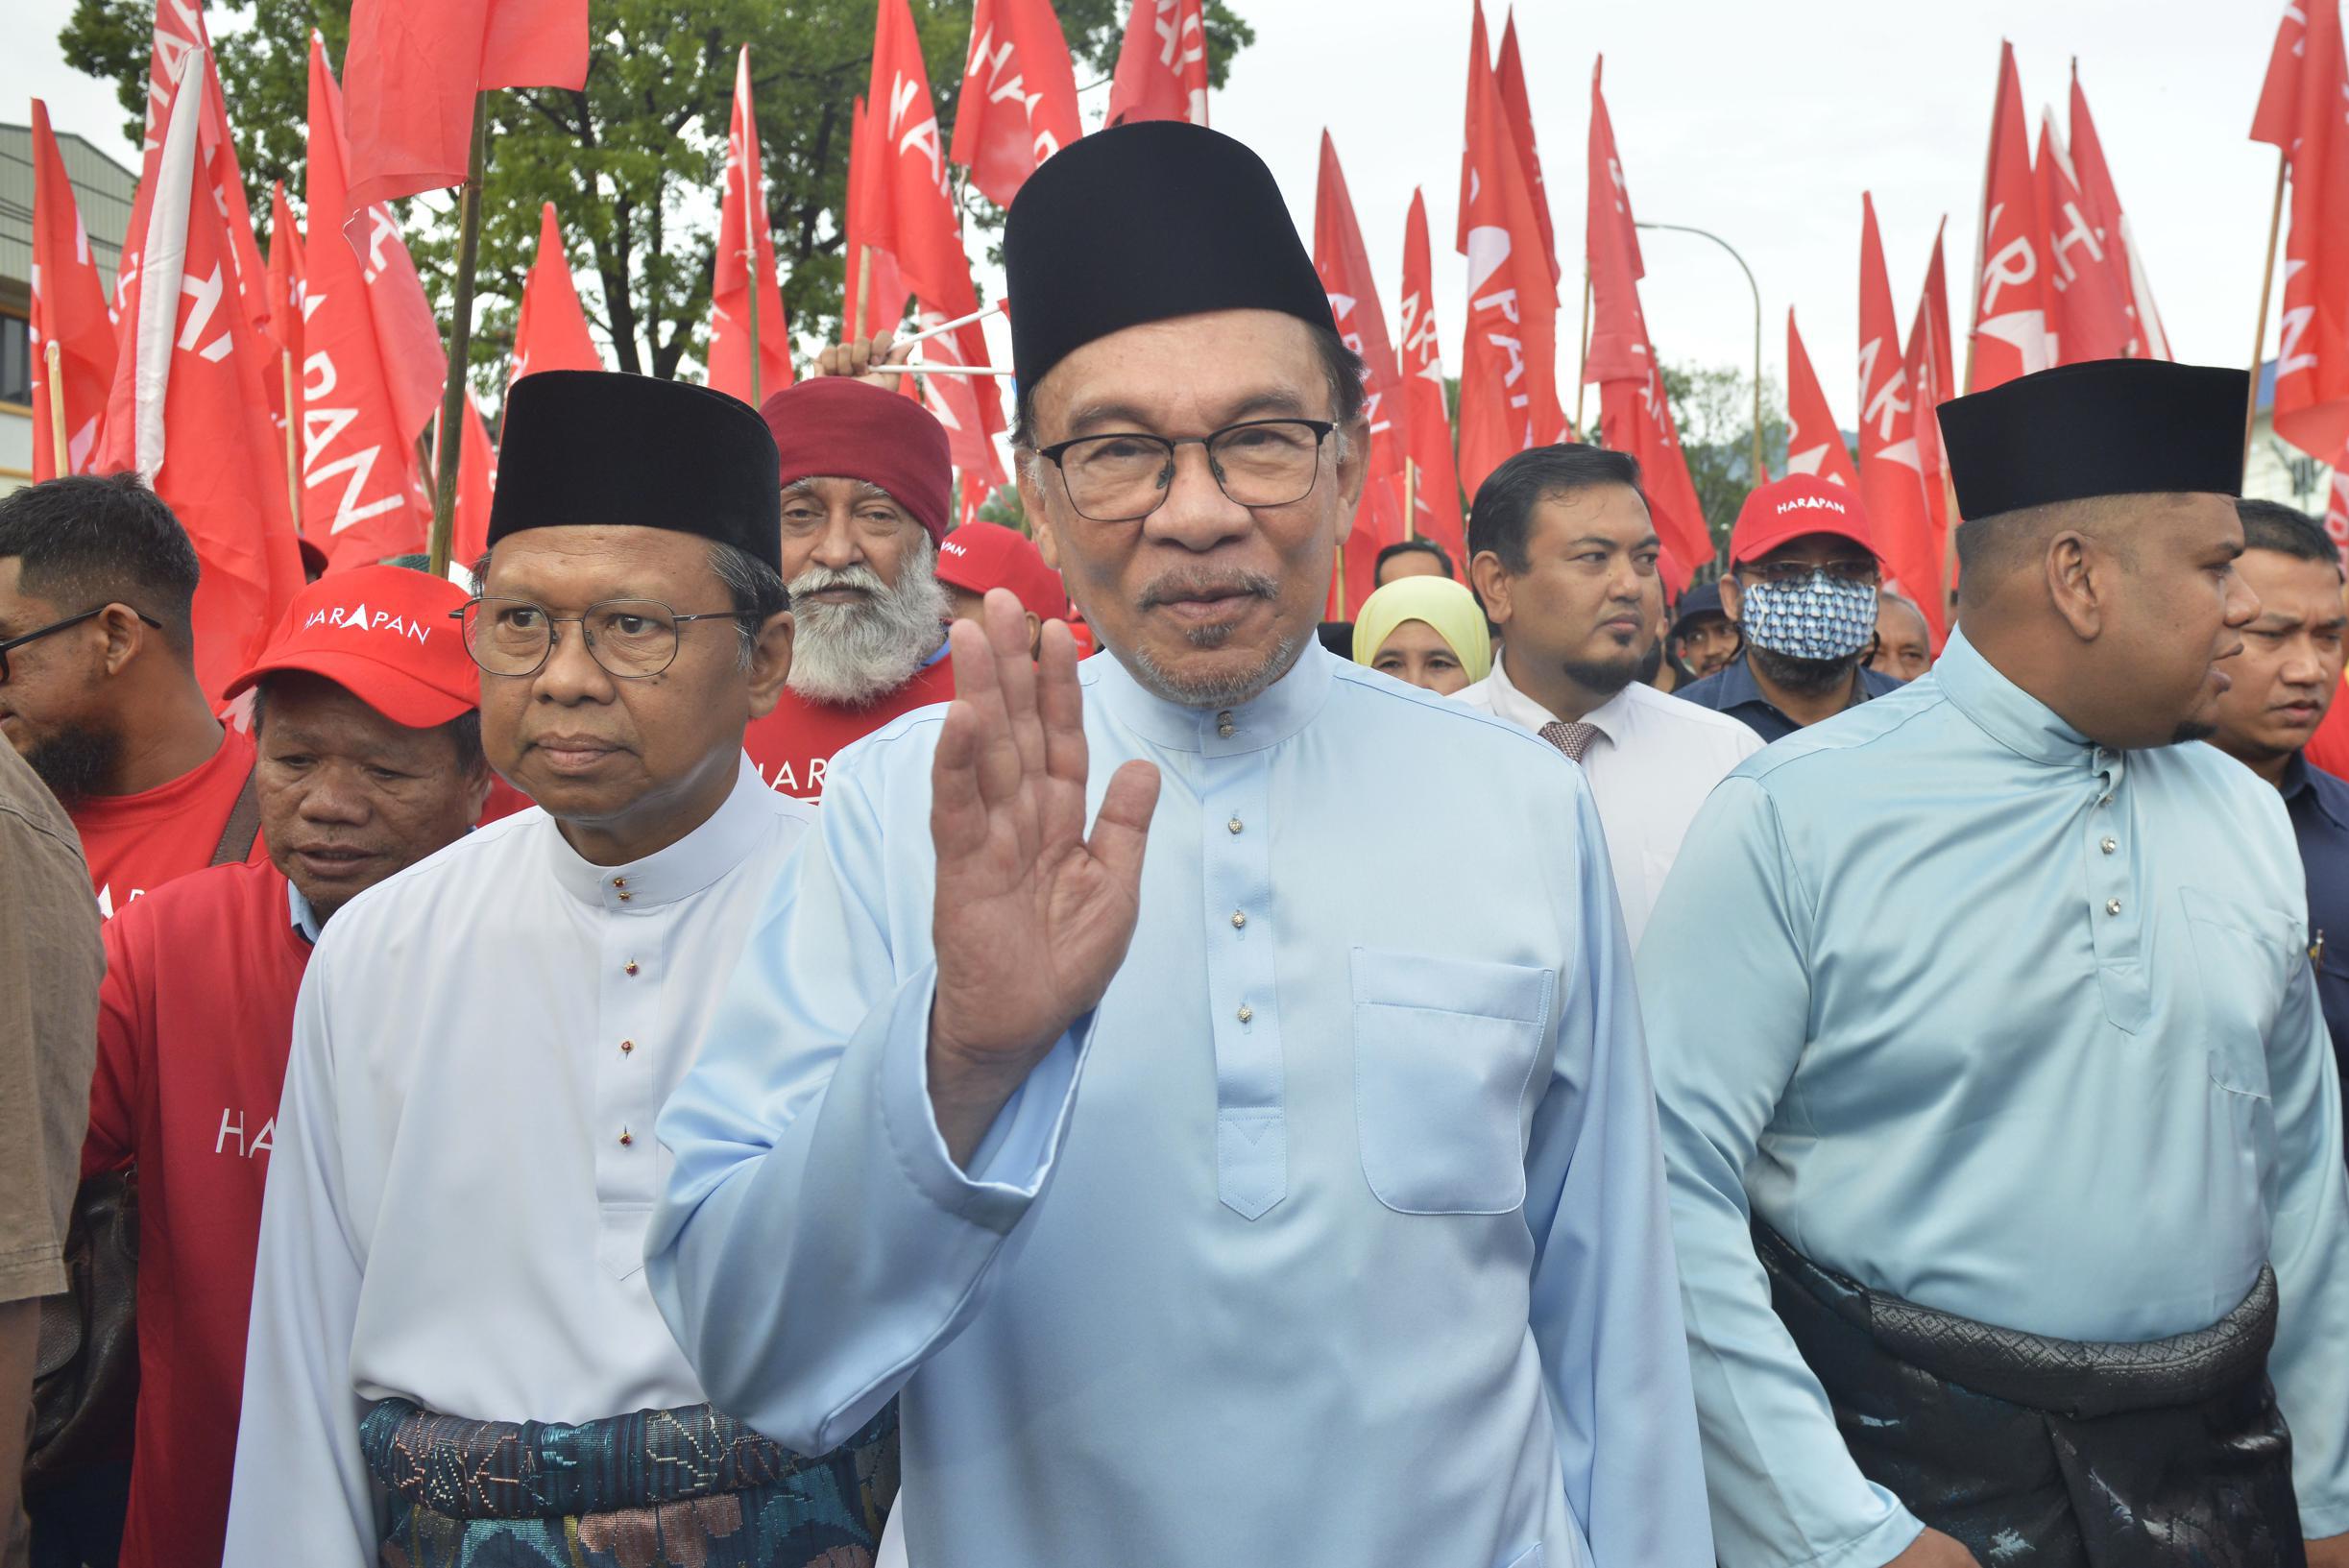 Reformist opposition leader becomes prime minister in Malaysia